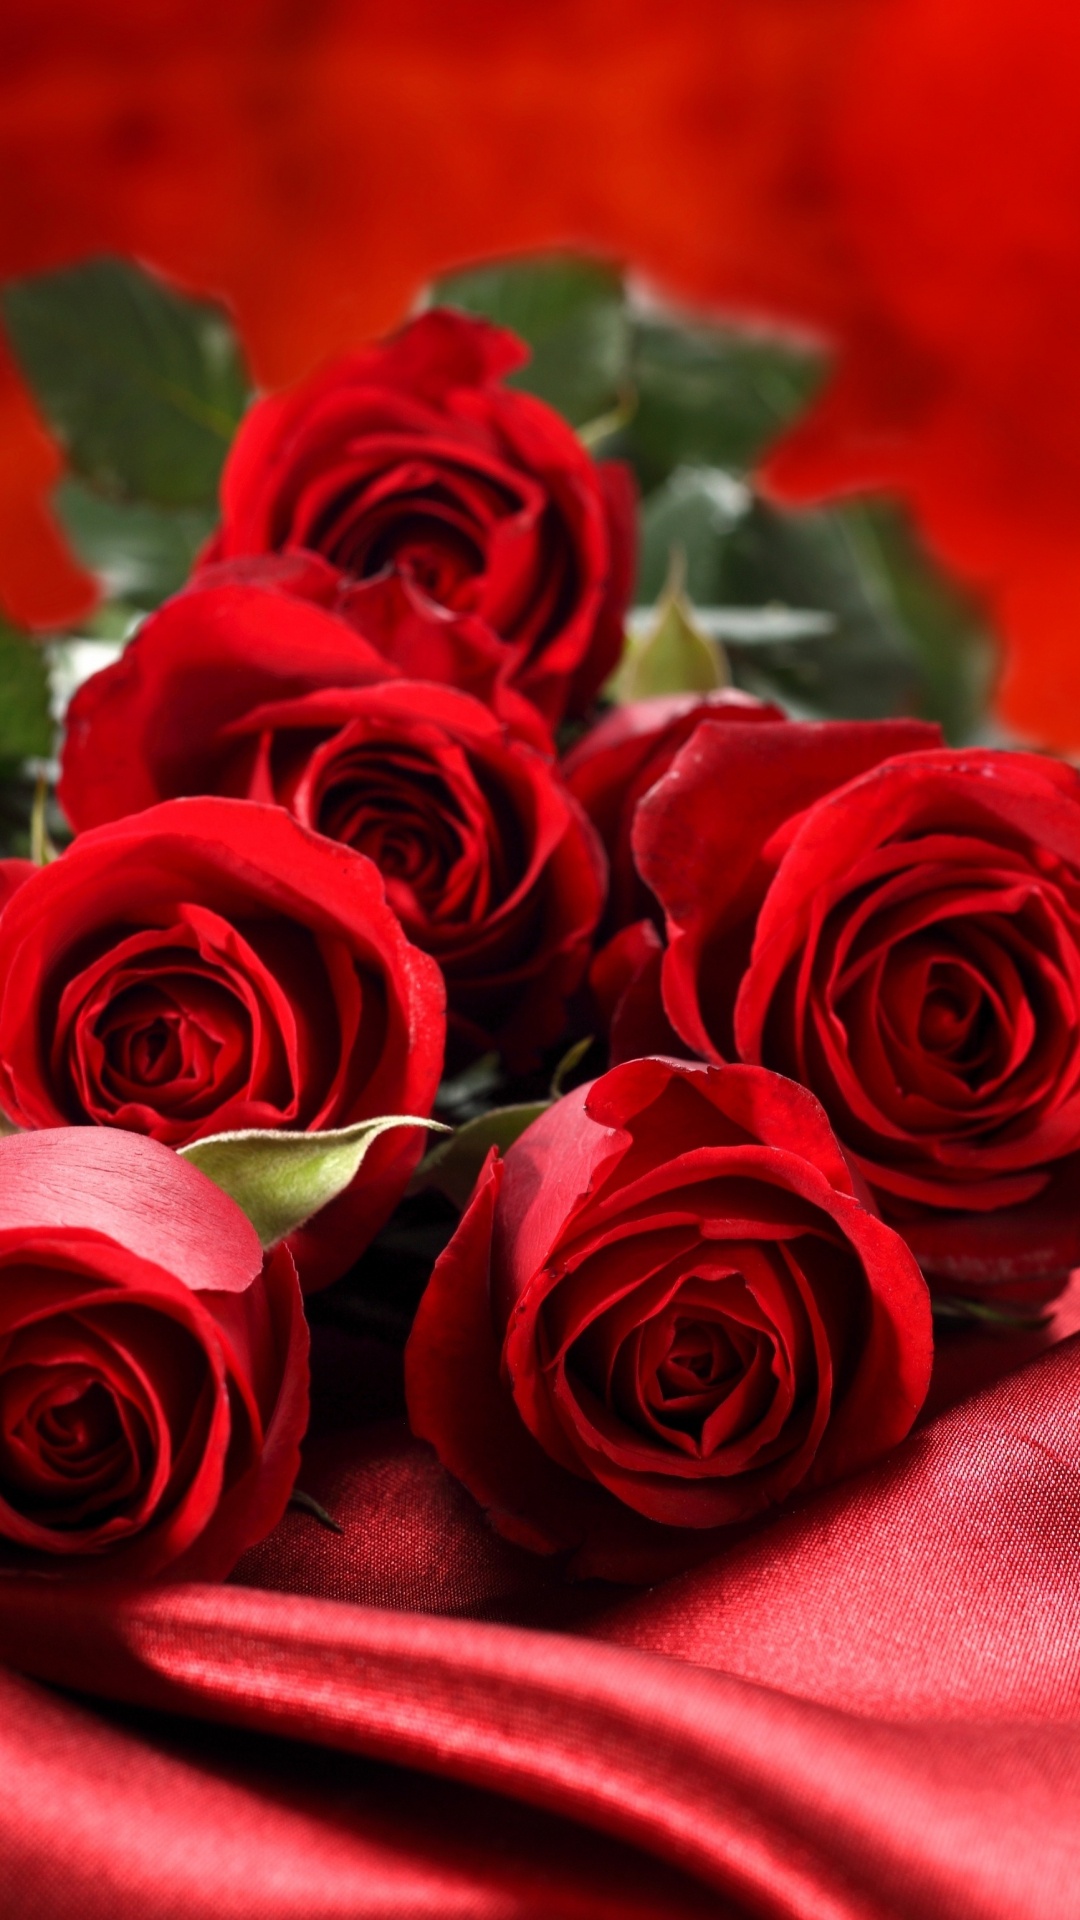 Red Roses on Red Textile. Wallpaper in 1080x1920 Resolution